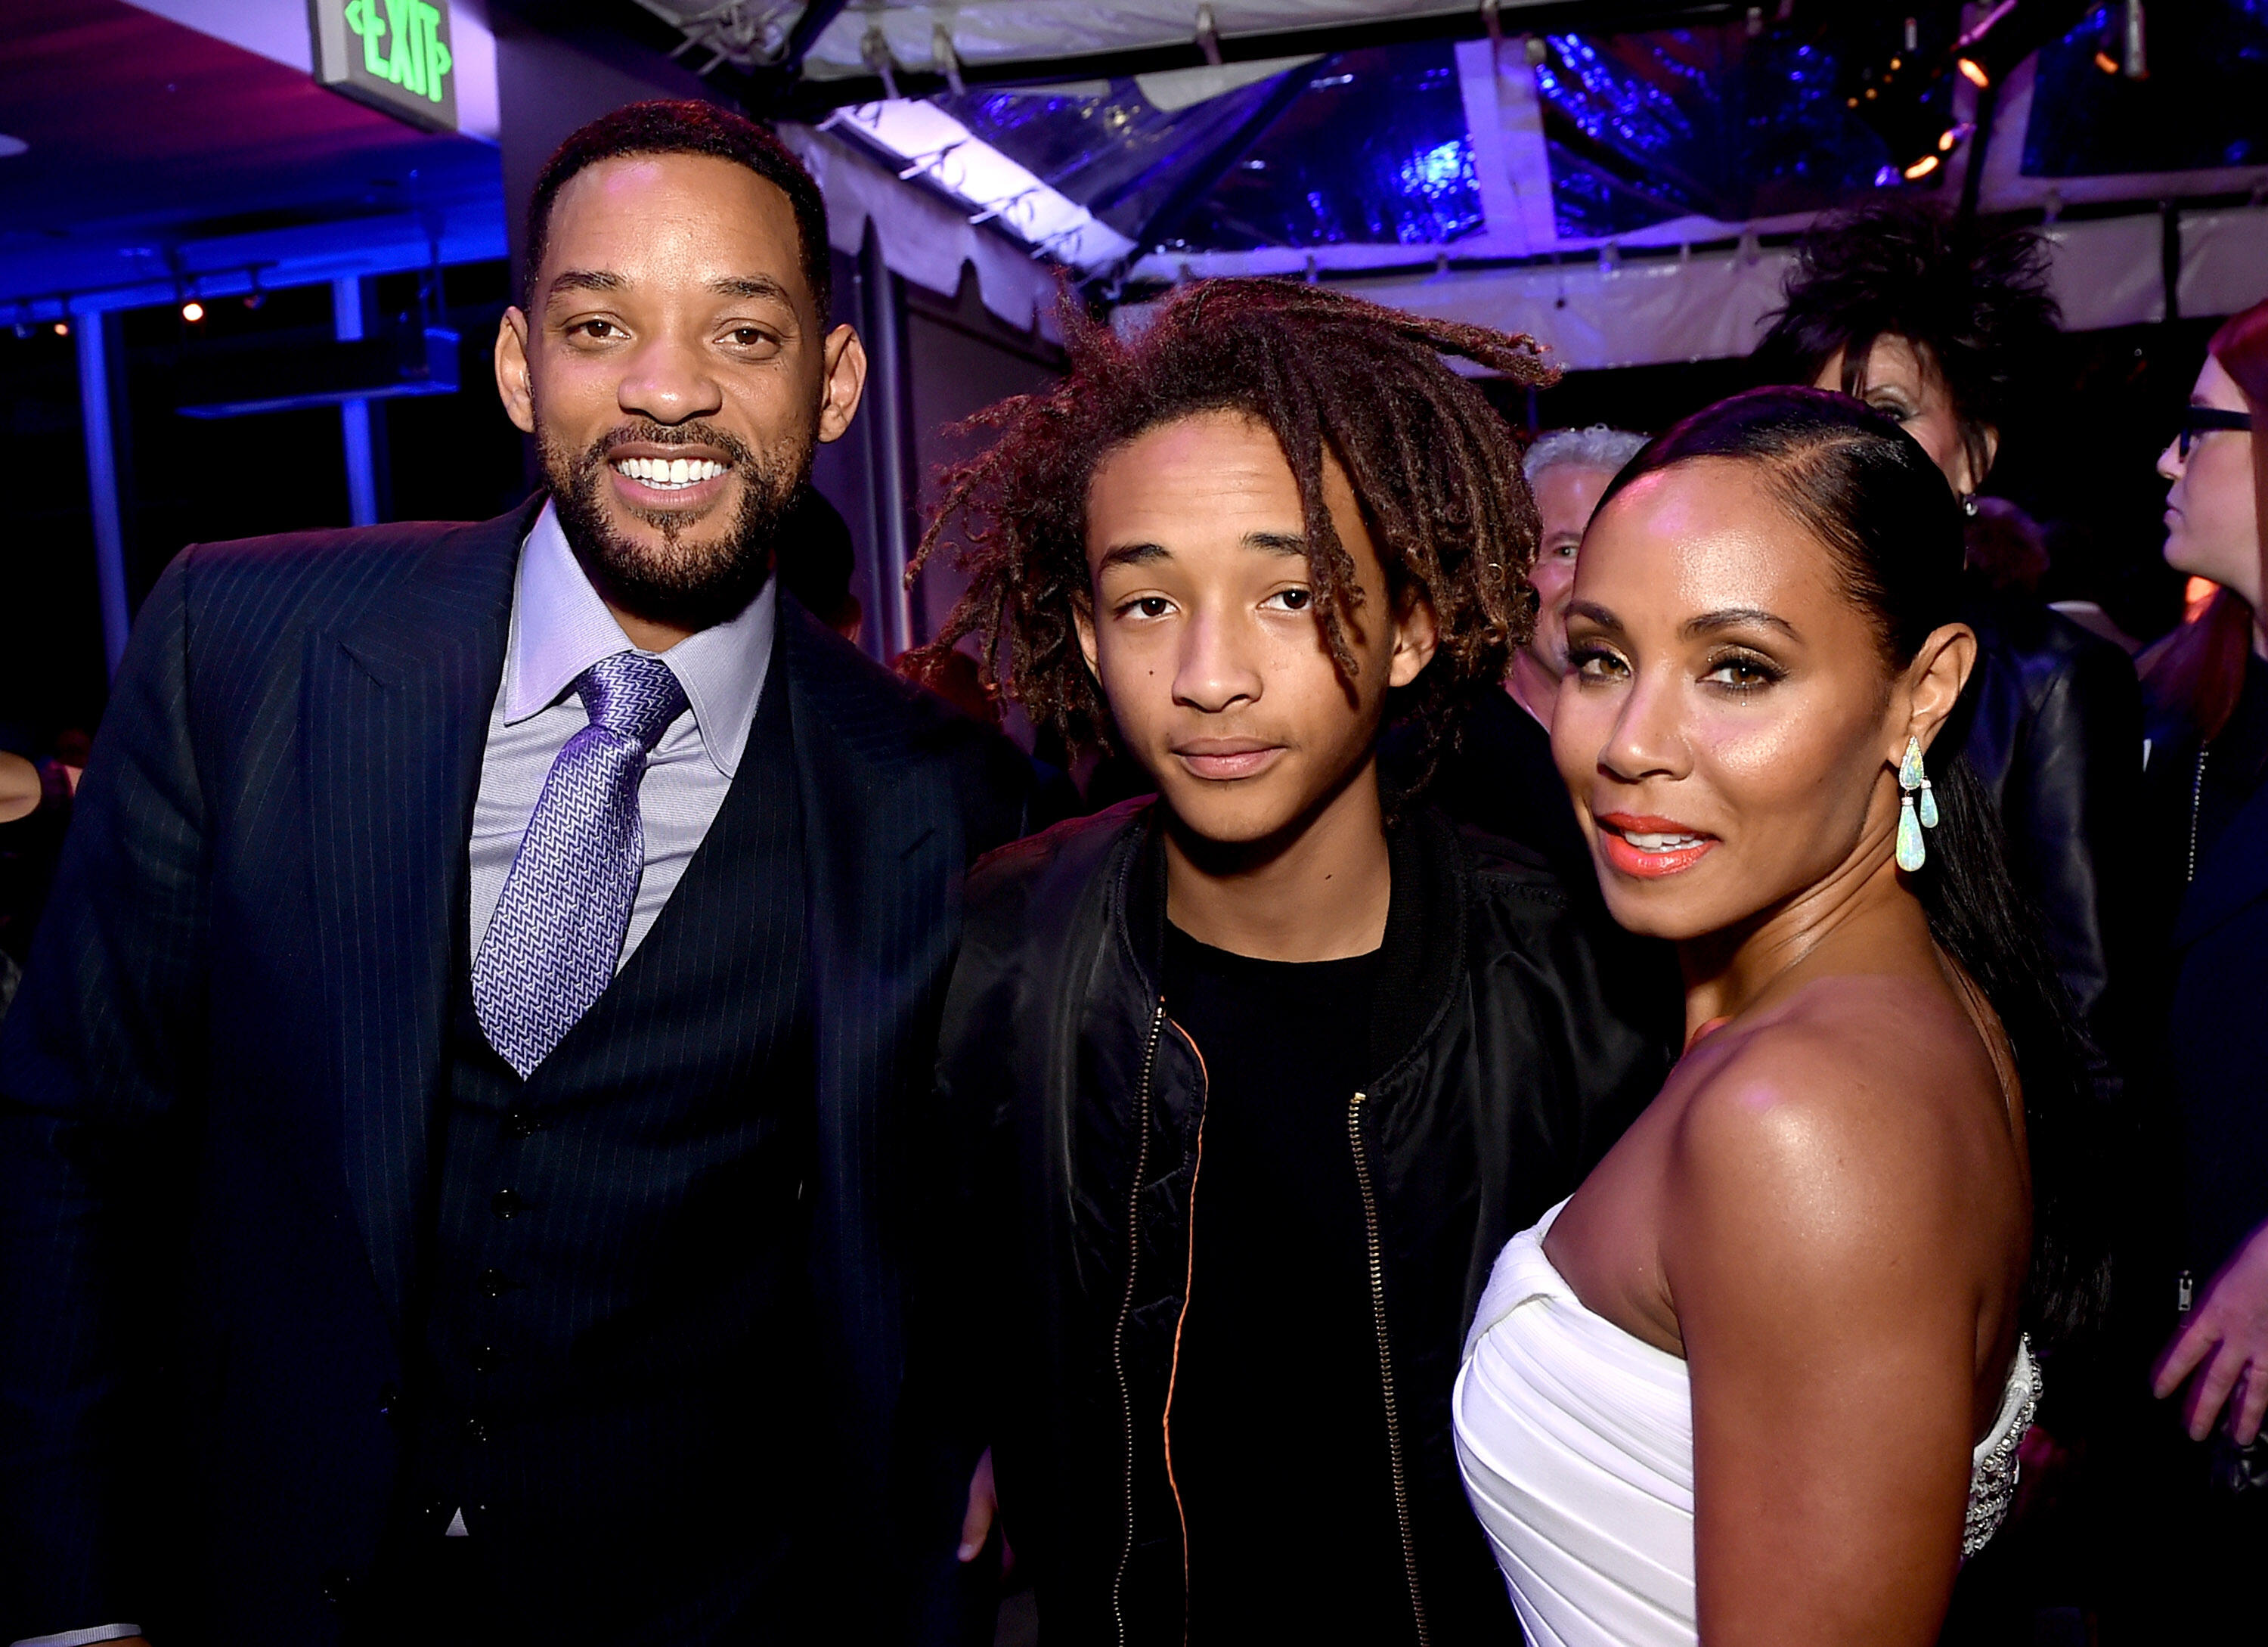 LOS ANGELES, CA - FEBRUARY 24:  (L-R) Actors Will Smith, son Jaden Smith and his wife Jada Pinkett Smith pose at the after party for the premiere of Warner Bros. Pictures' 